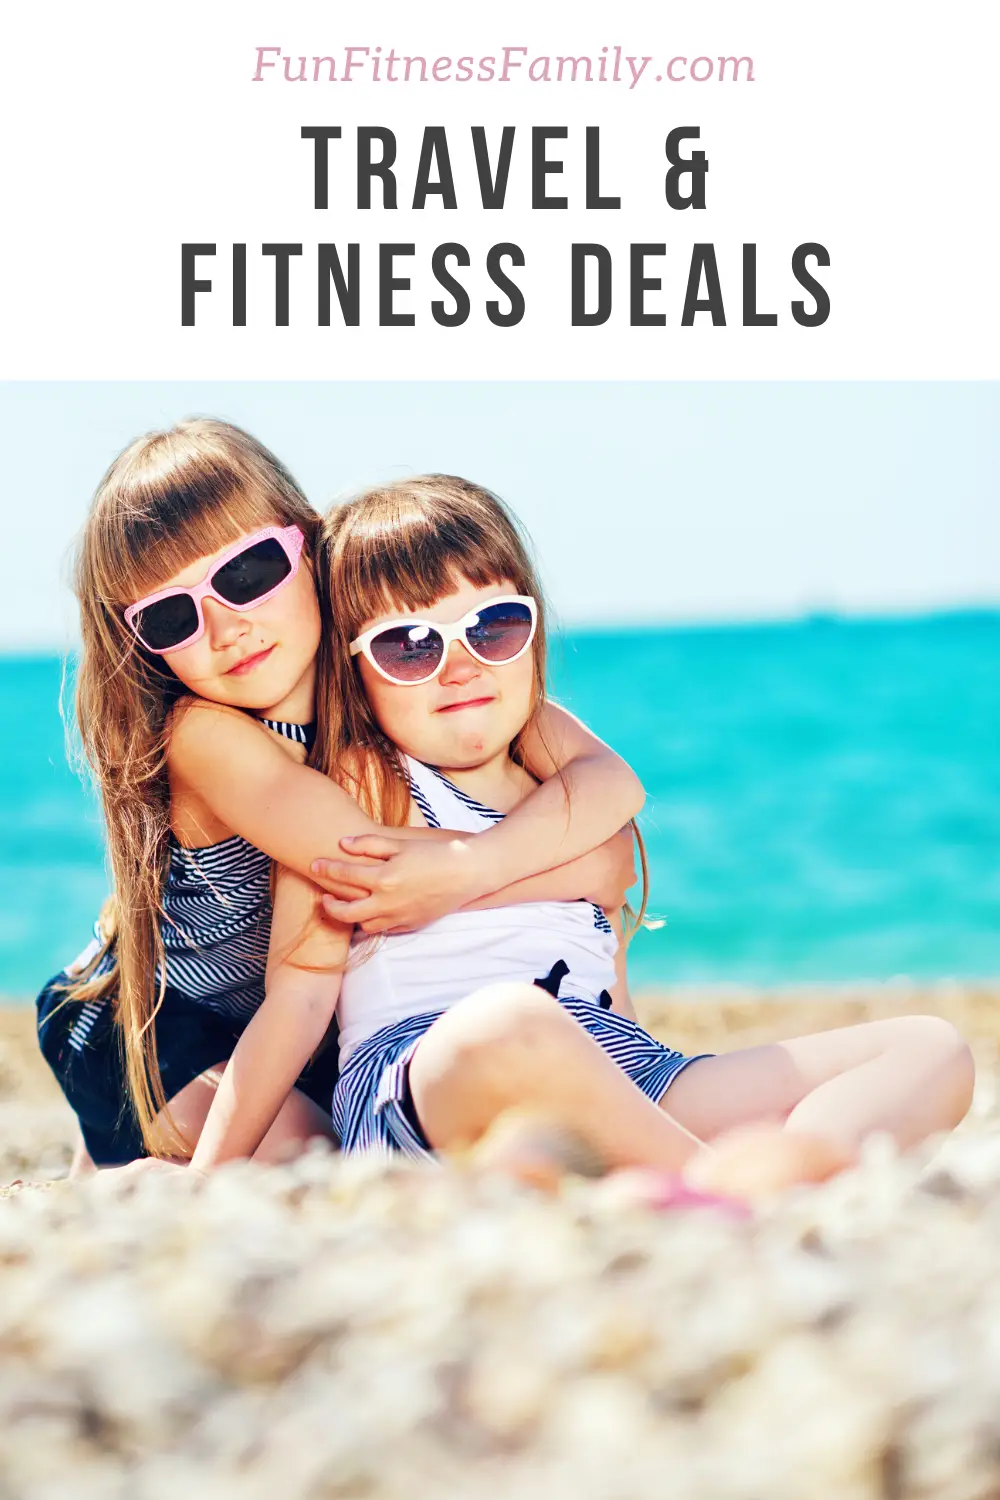 Looking for travel deals and giveaways? Check out our site for money-saving offers on family fun, show tickets, area events, fitness products, and travel activities!
#giveaways #traveldeals #familytravel